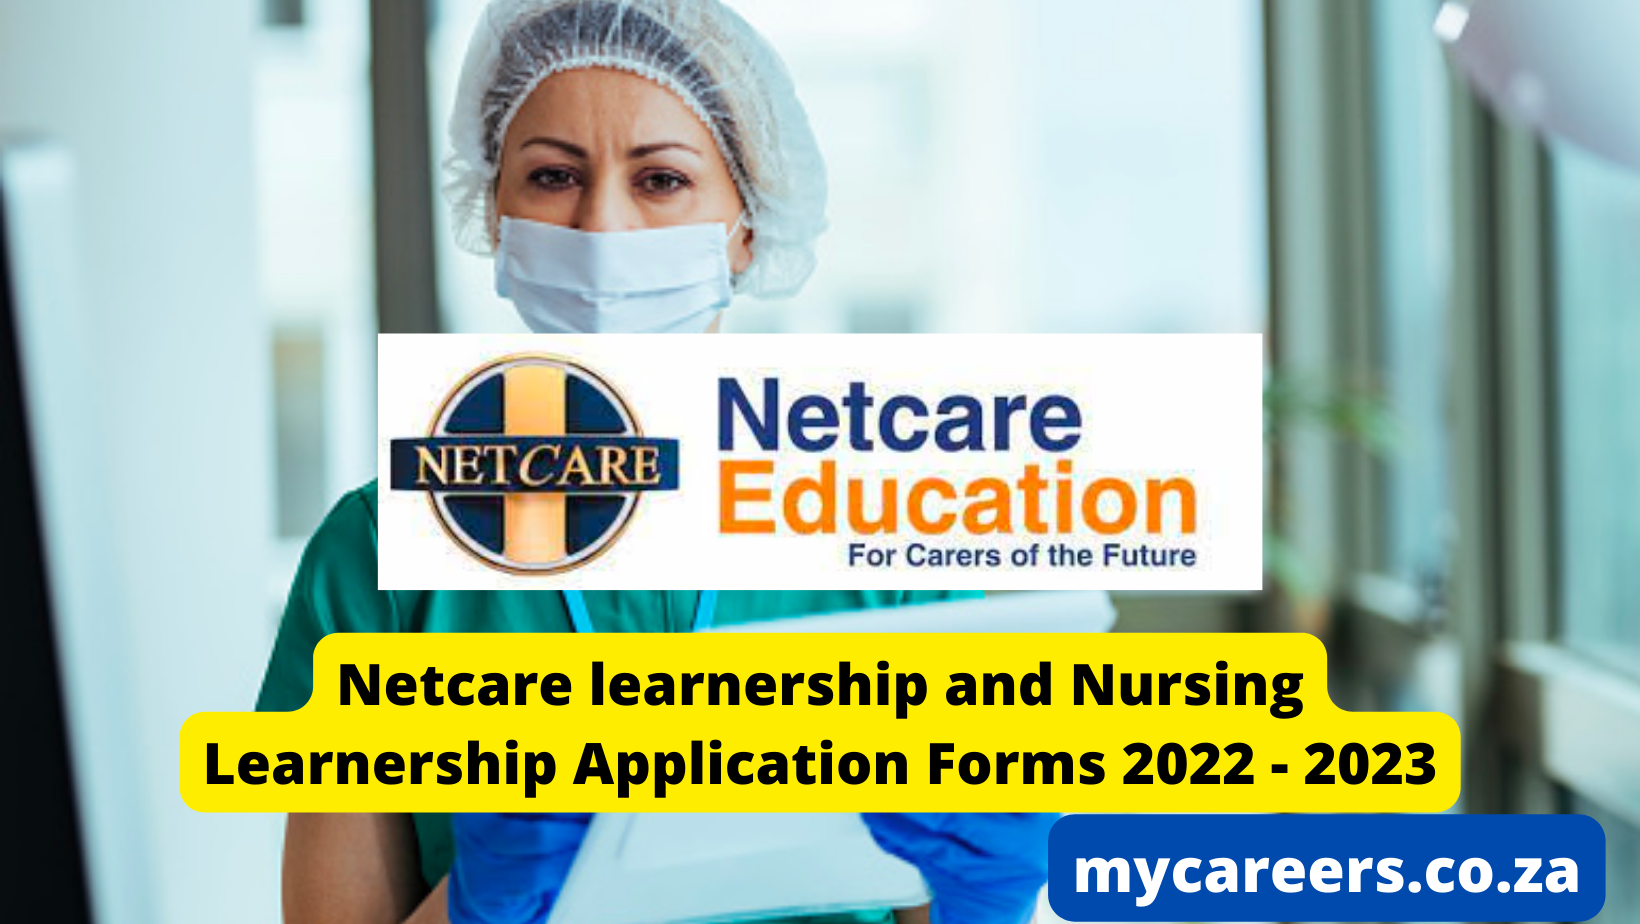 Netcare learnership and Nursing Learnership Application Forms 2022